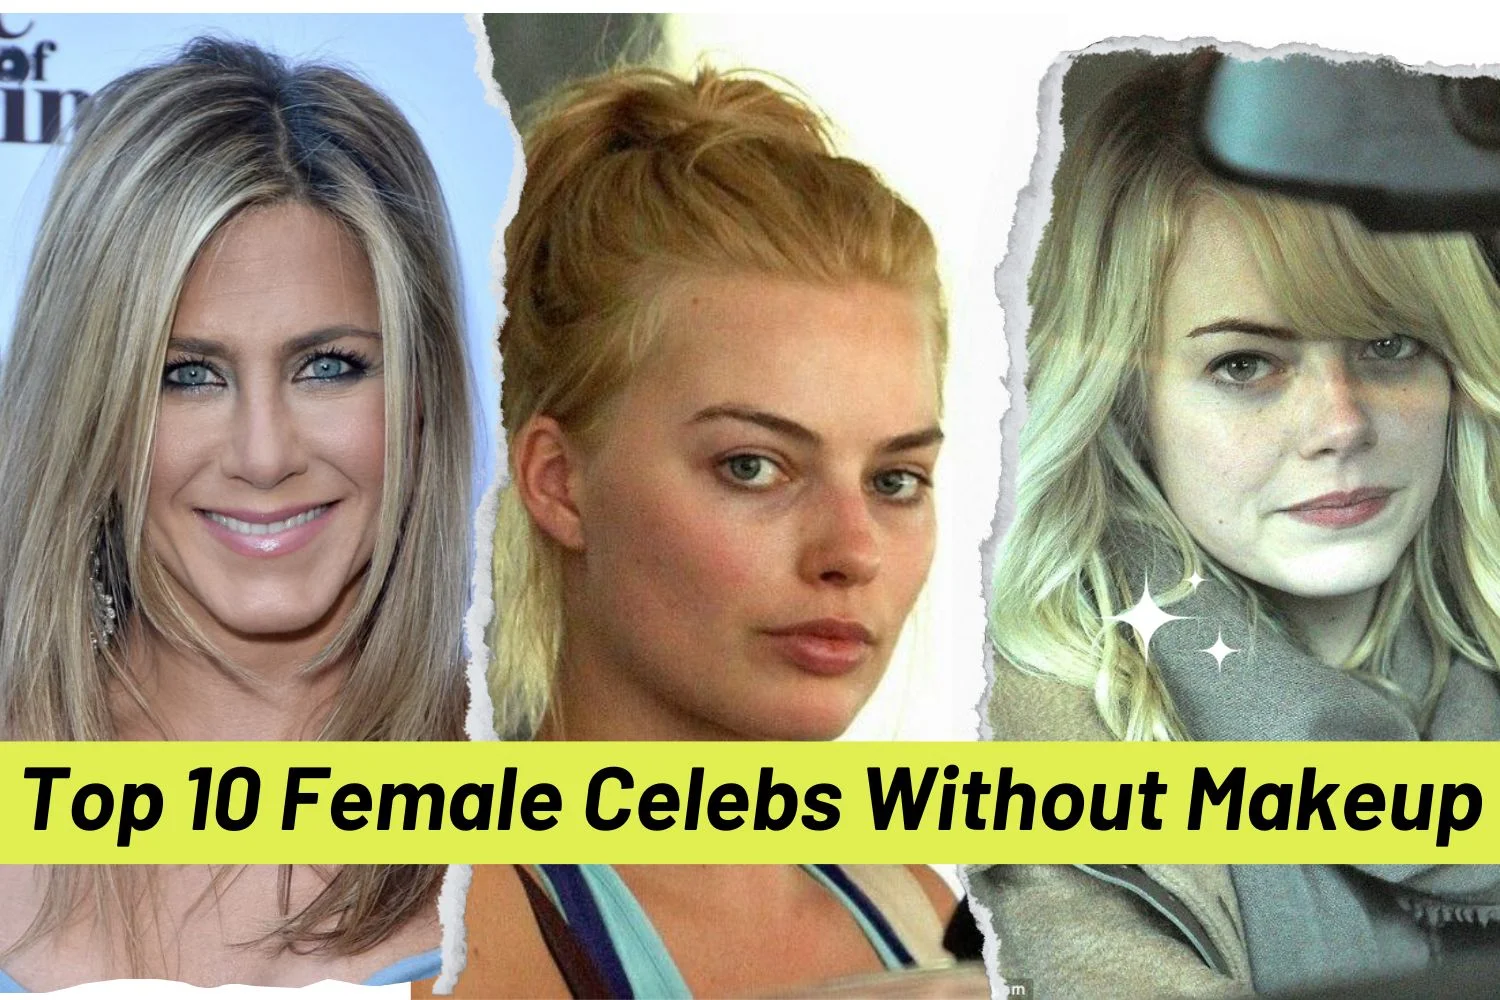 Top 10 Female Celebs Without Makeup